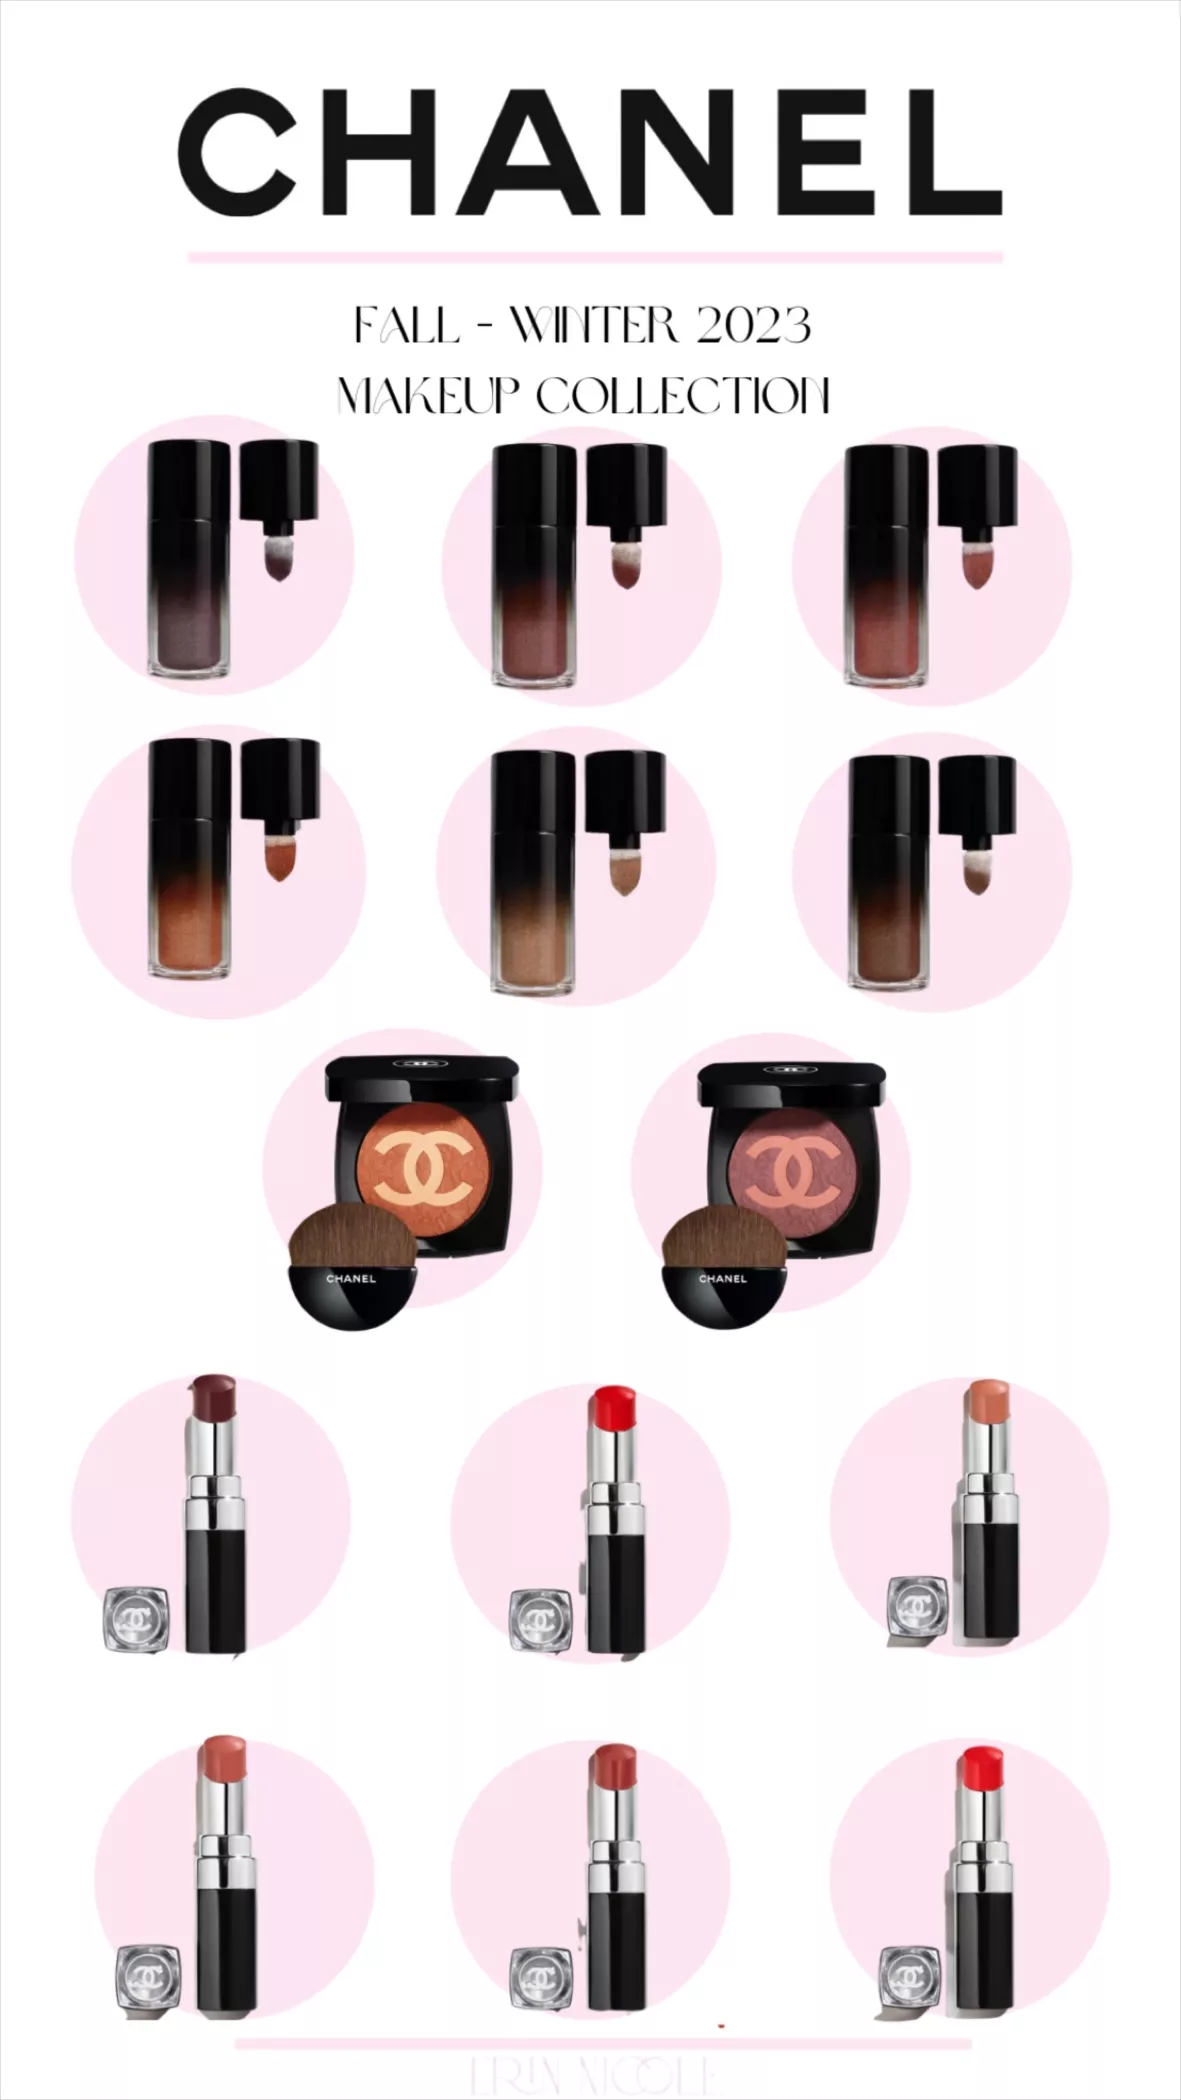 CHANEL SPRING 2023 MAKEUP COLLECTION PREVIEW 